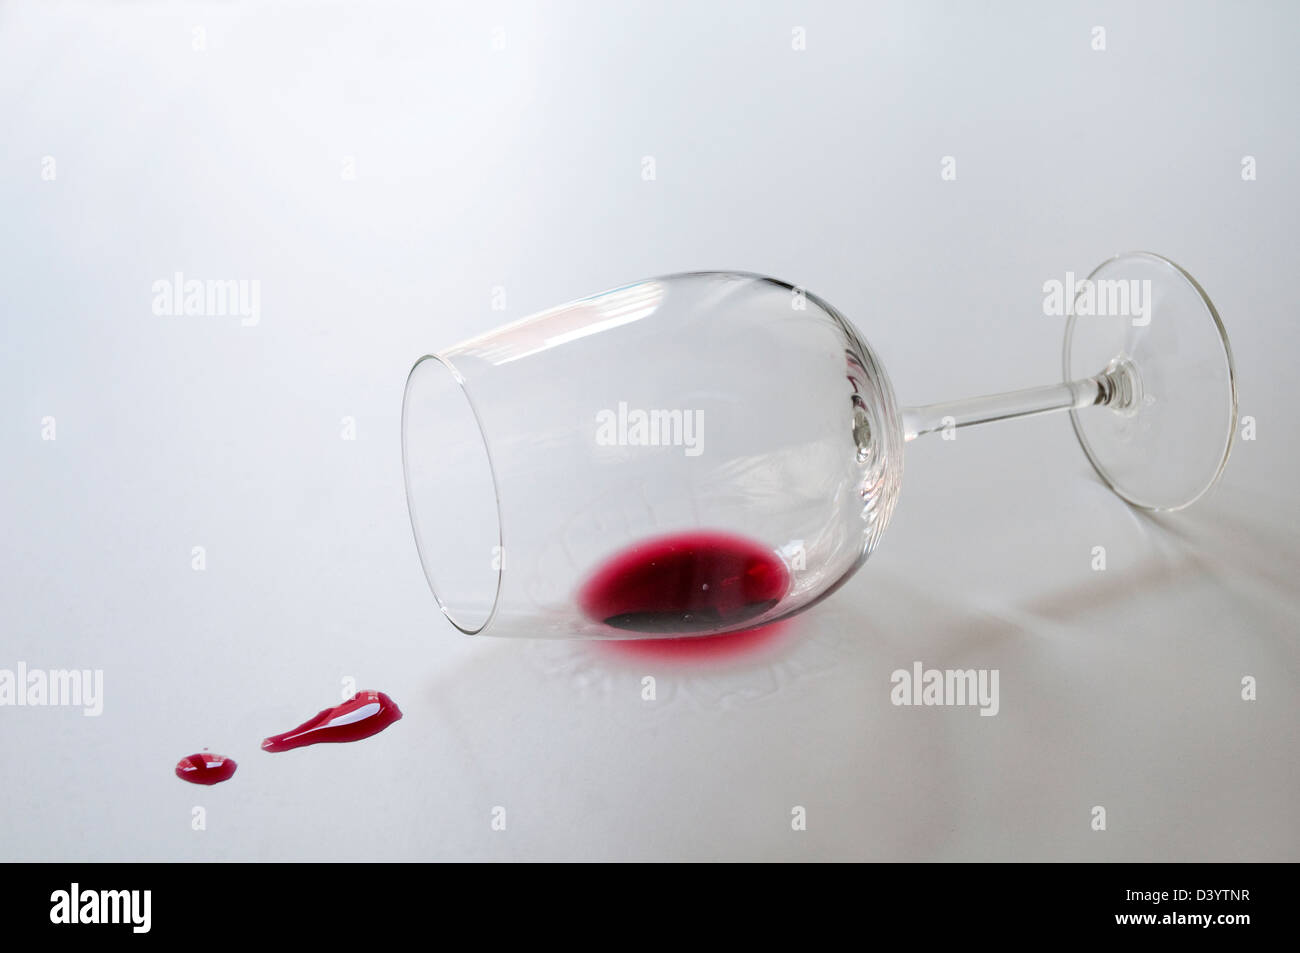 Knocked over glass and split wine. Stock Photo